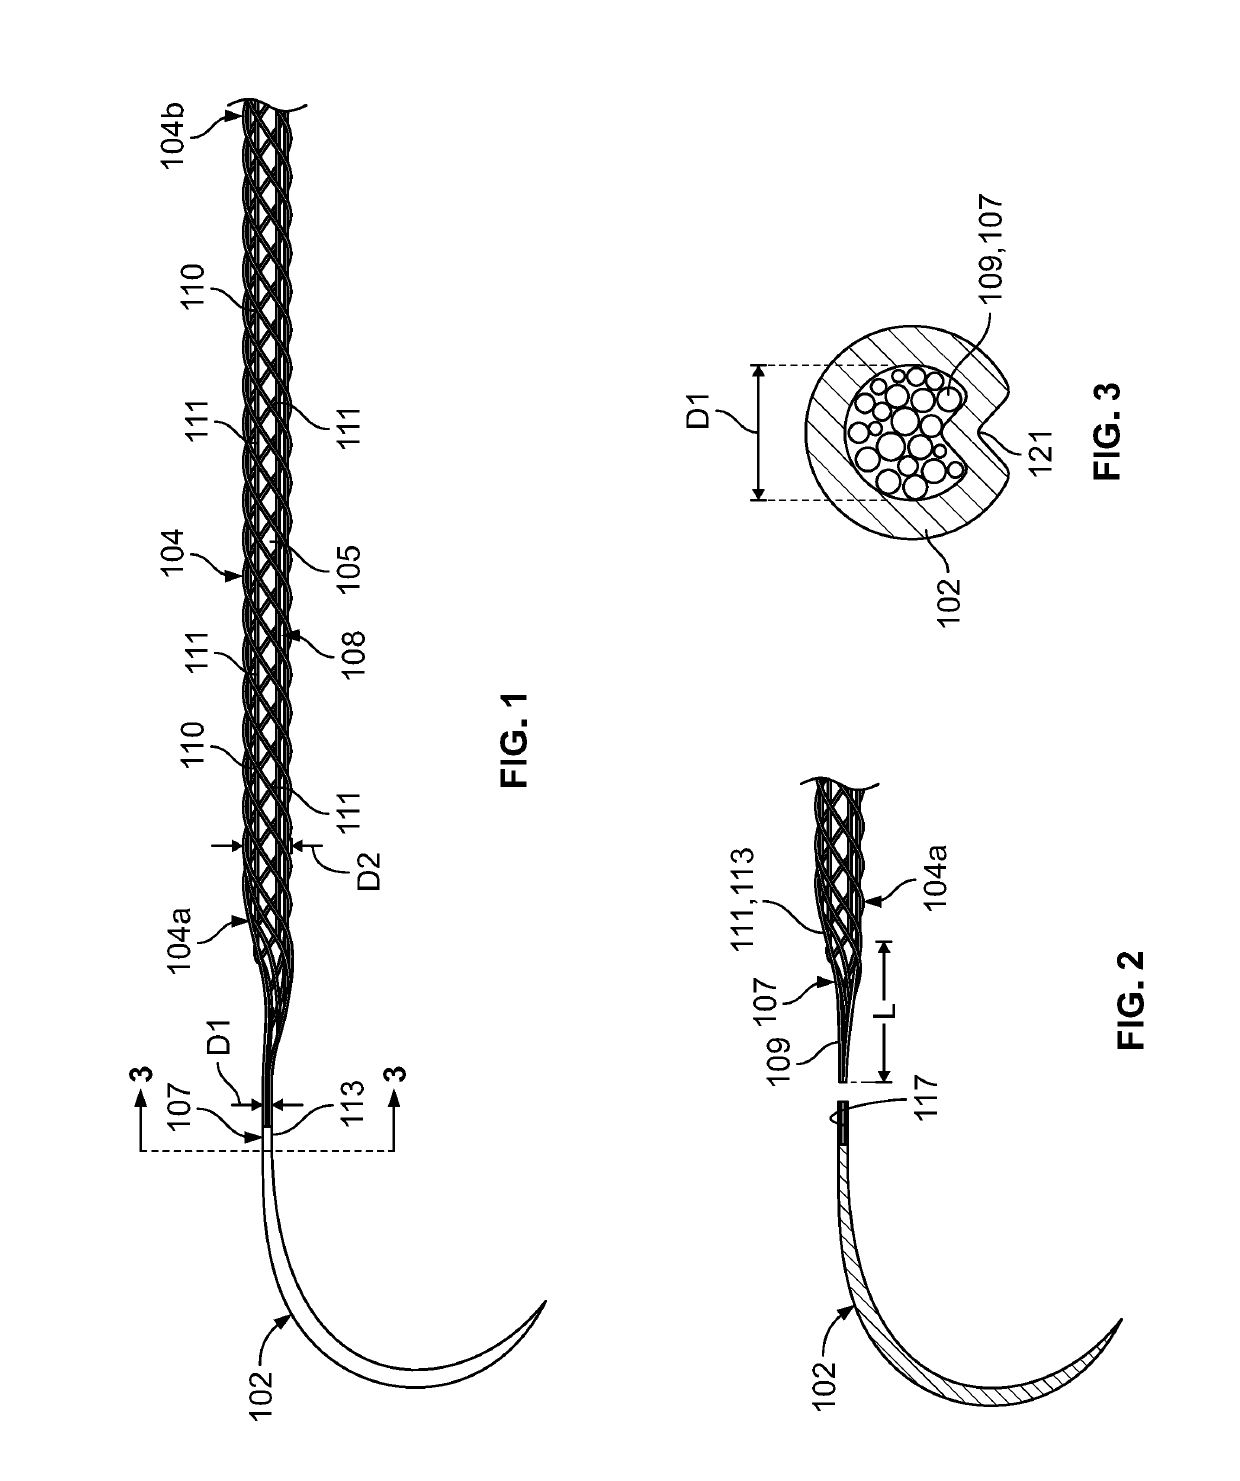 Indirect attachment of a needle to a mesh suture